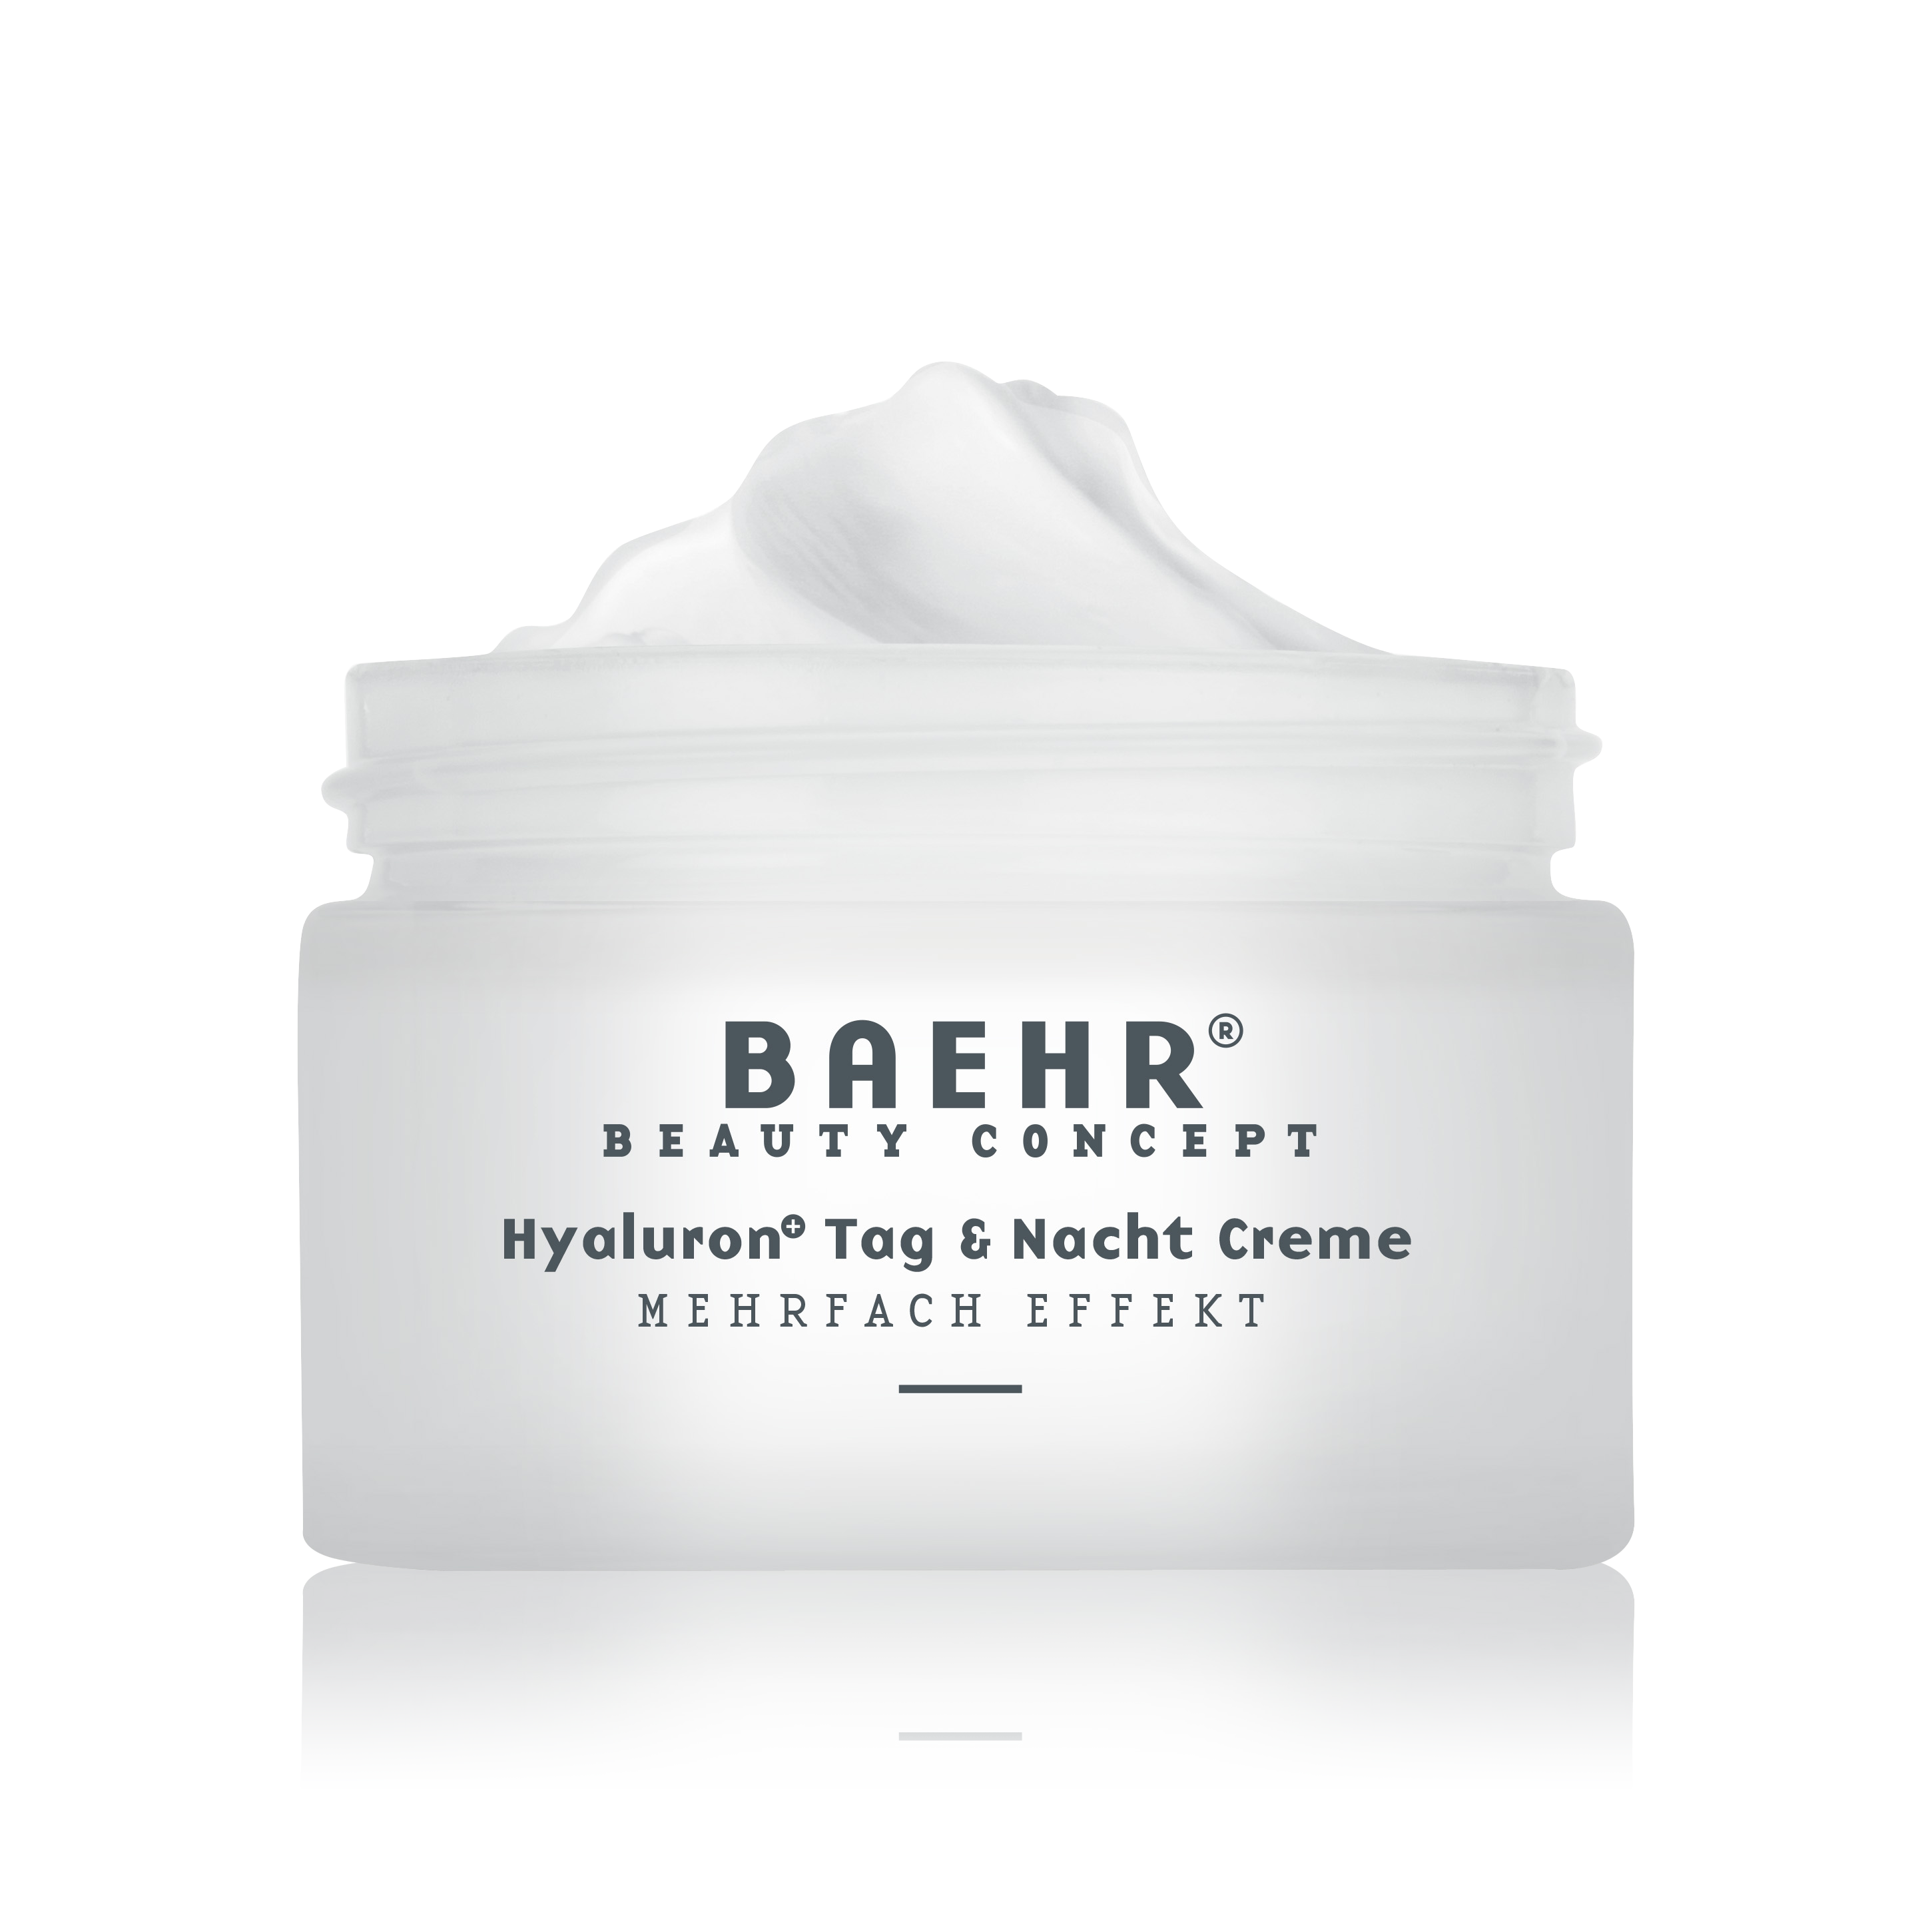 BAEHR BEAUTY CONCEPT Hyaluron+ Tag & Nacht Creme 50 ml